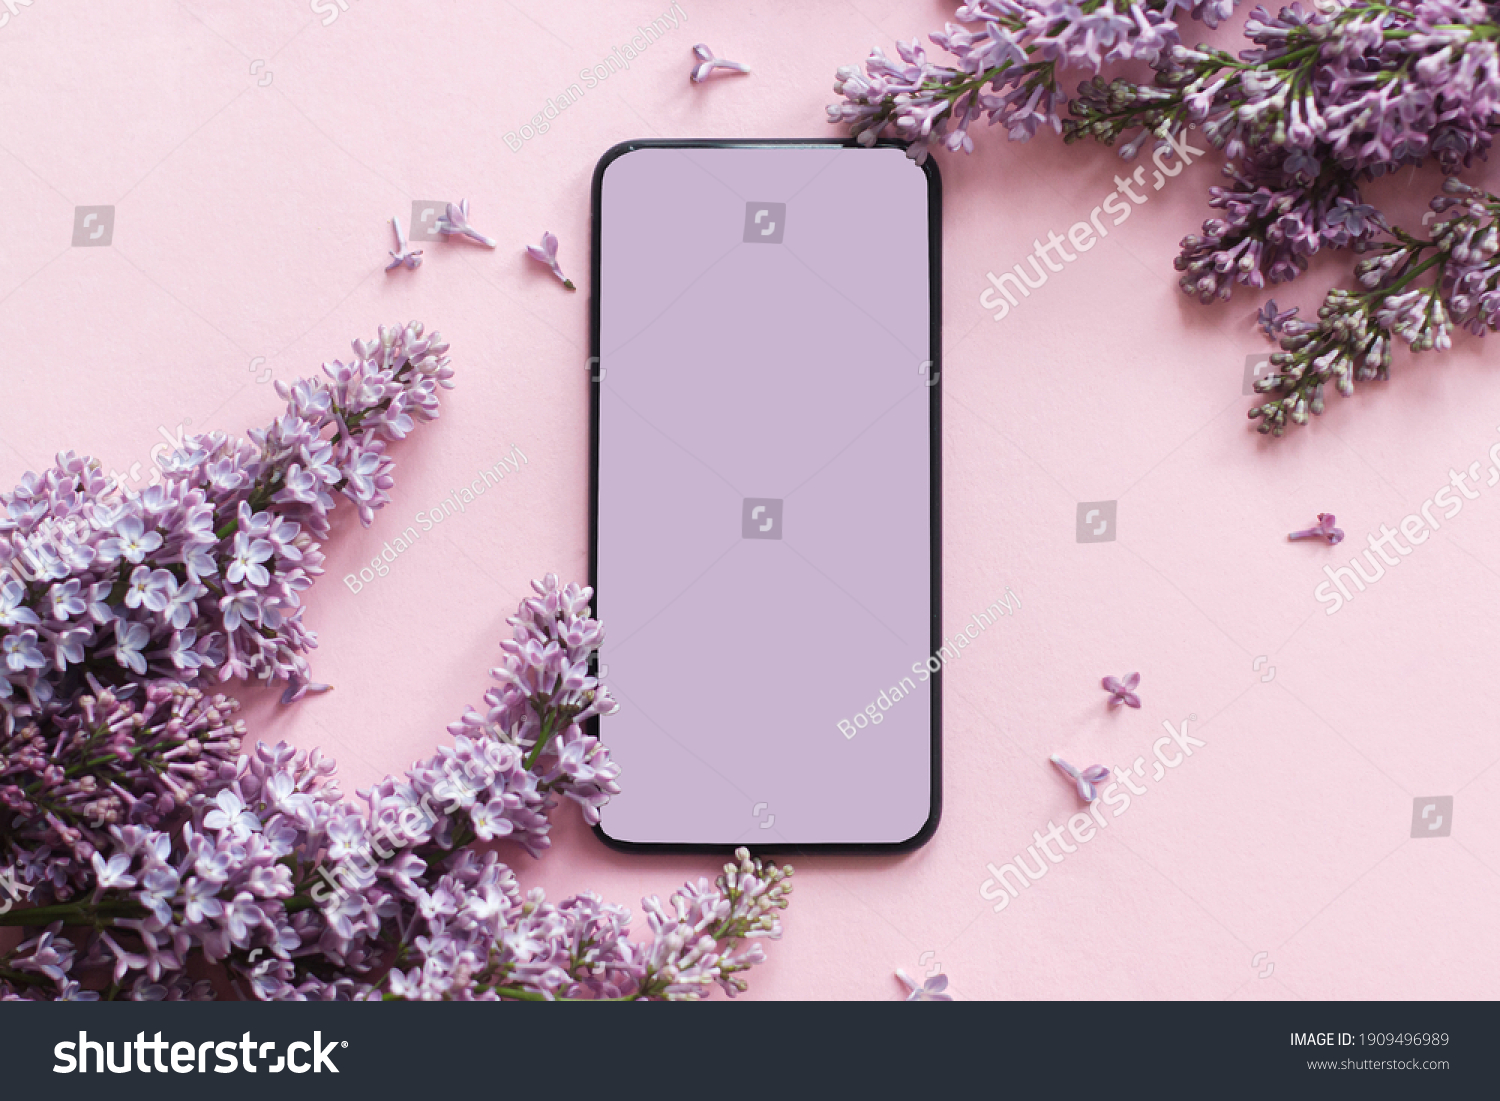 Phone with blank screen and lilac flowers border flat lay on pink paper. Smartphone mock up. Digital online spring greeting card with space for text. Happy mothers day and Womens day concept #1909496989